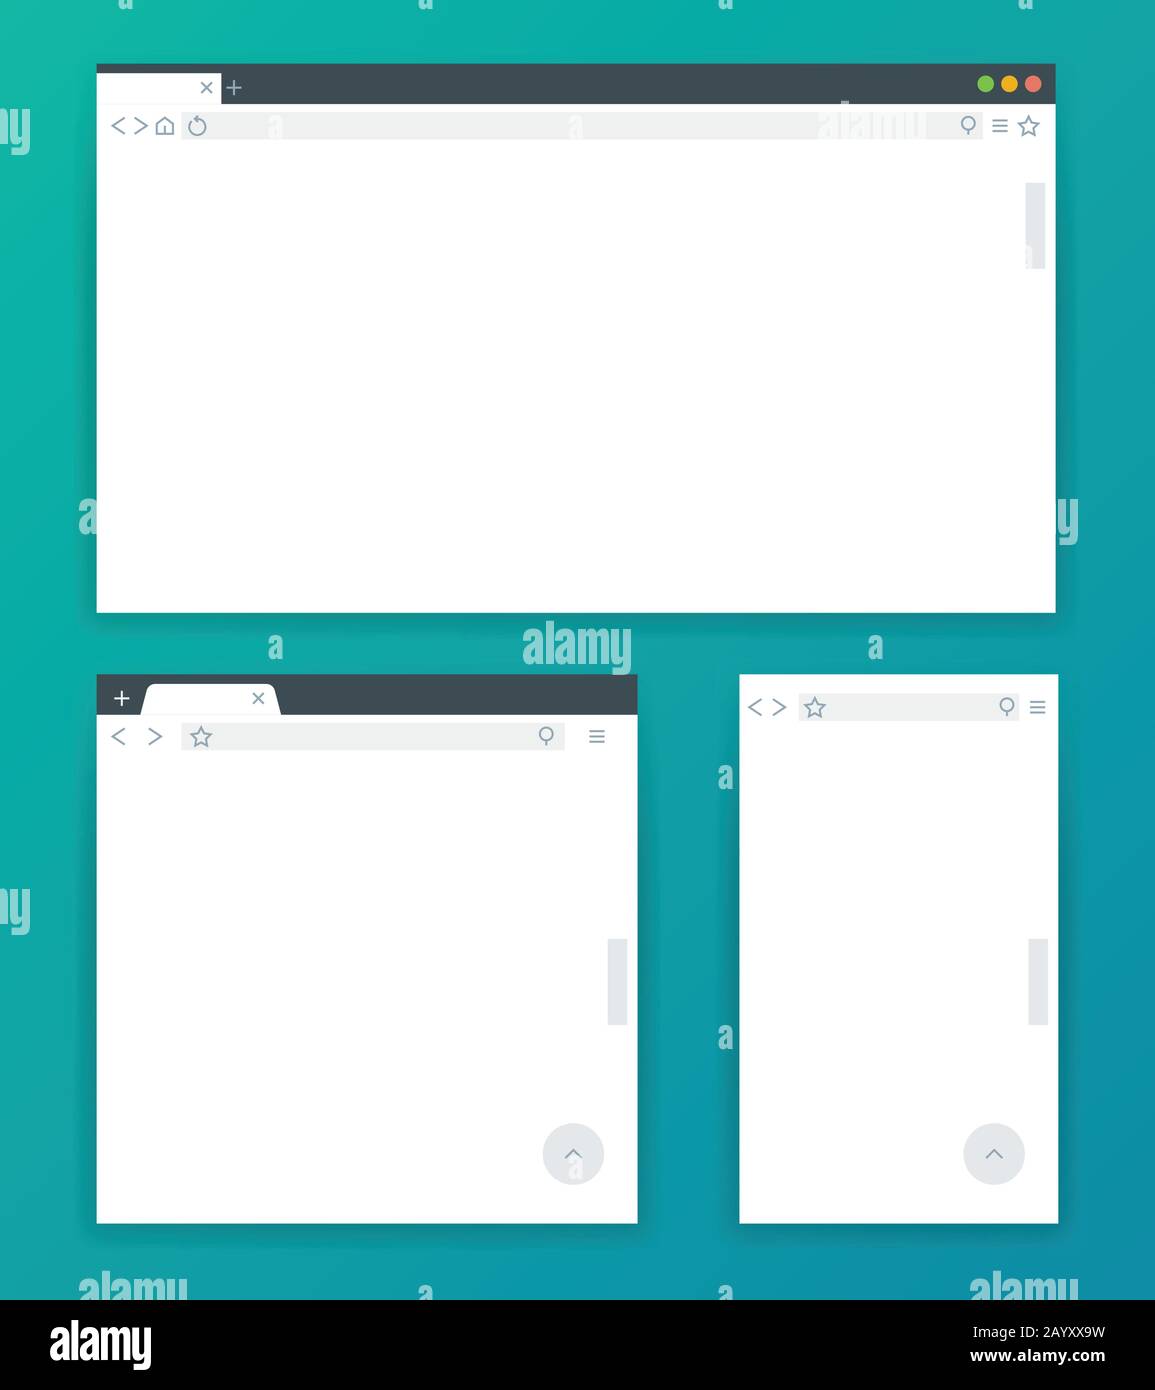 Blank browser windows for devices of computer, tablet, and phone. Templates for adaptive responsive web design. Vector illustration Stock Vector